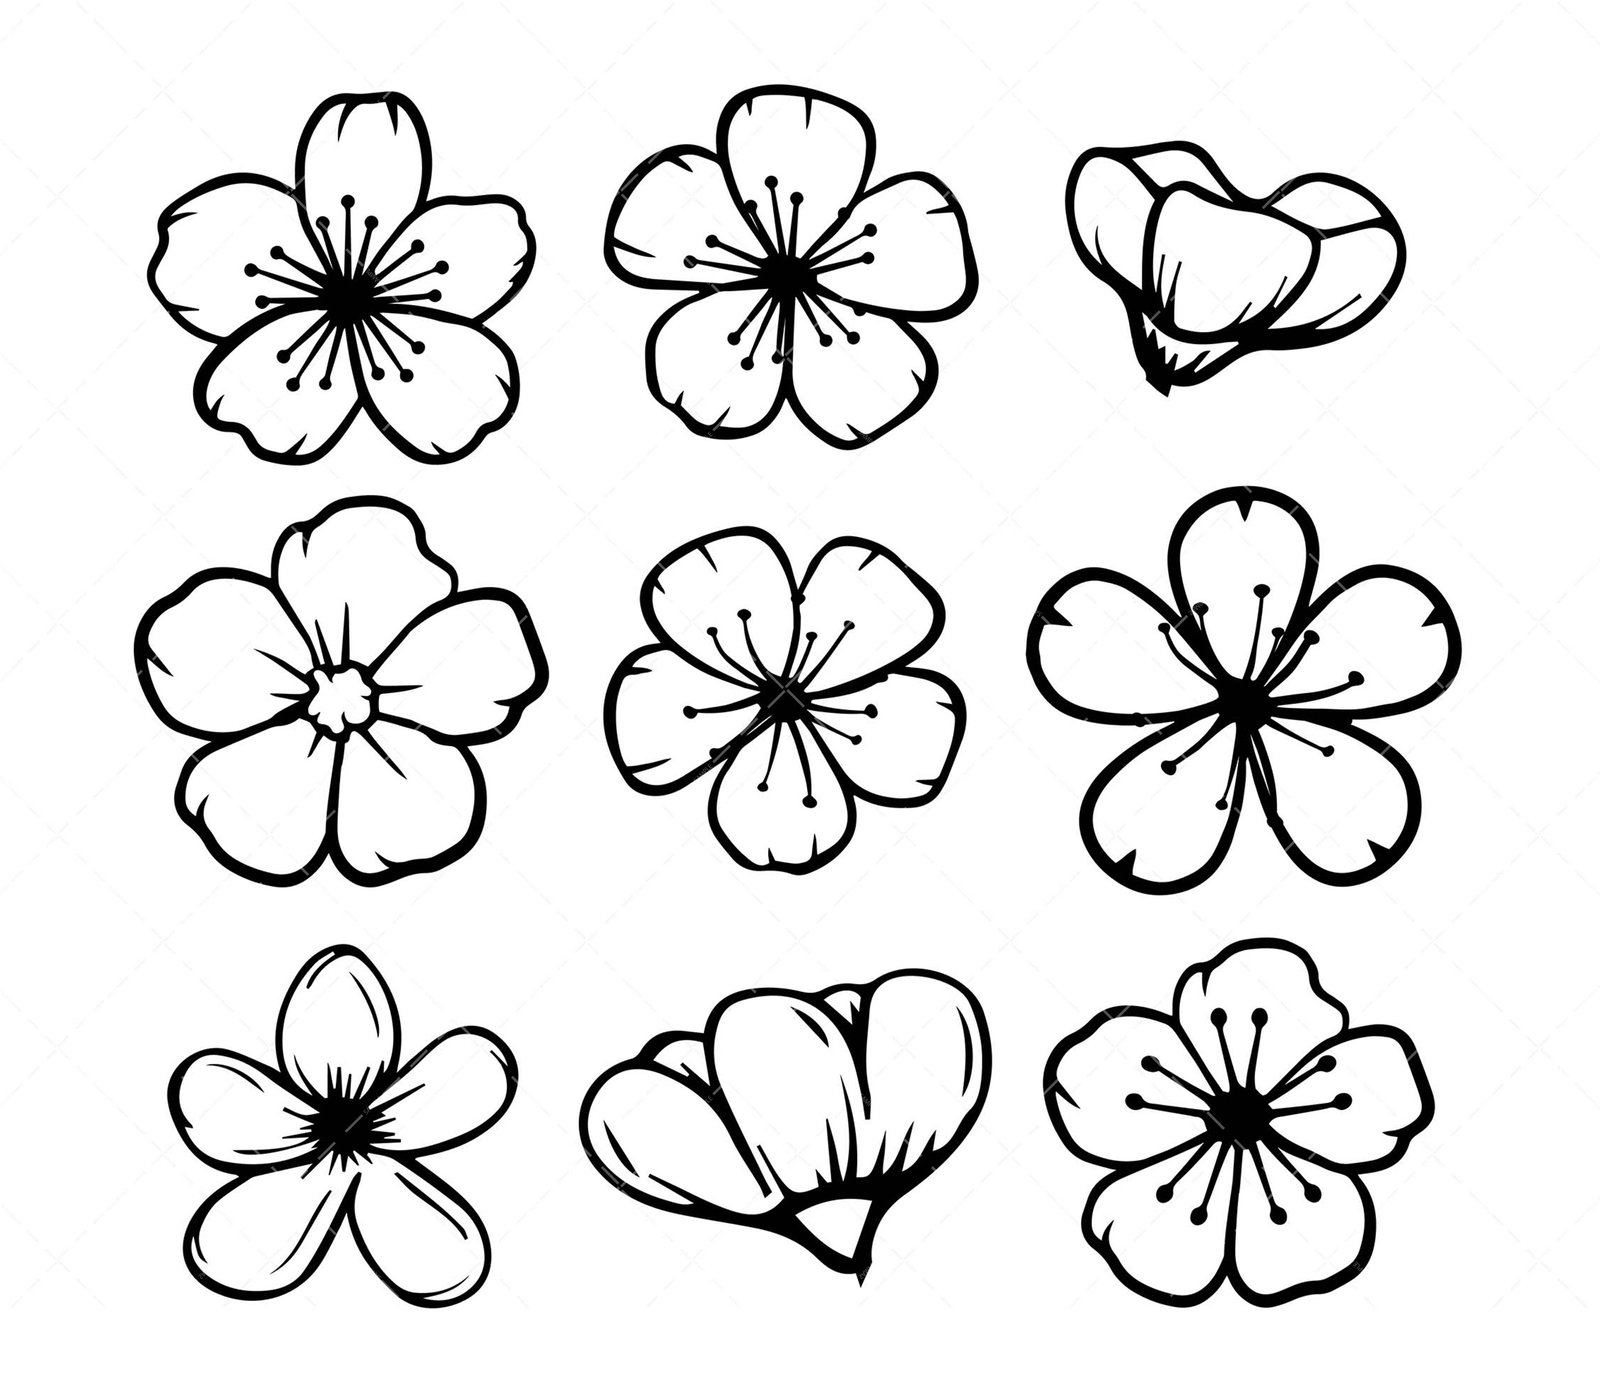 PDF PNG Studio file for cutting and printing Silhouette Sakura Flower SVG